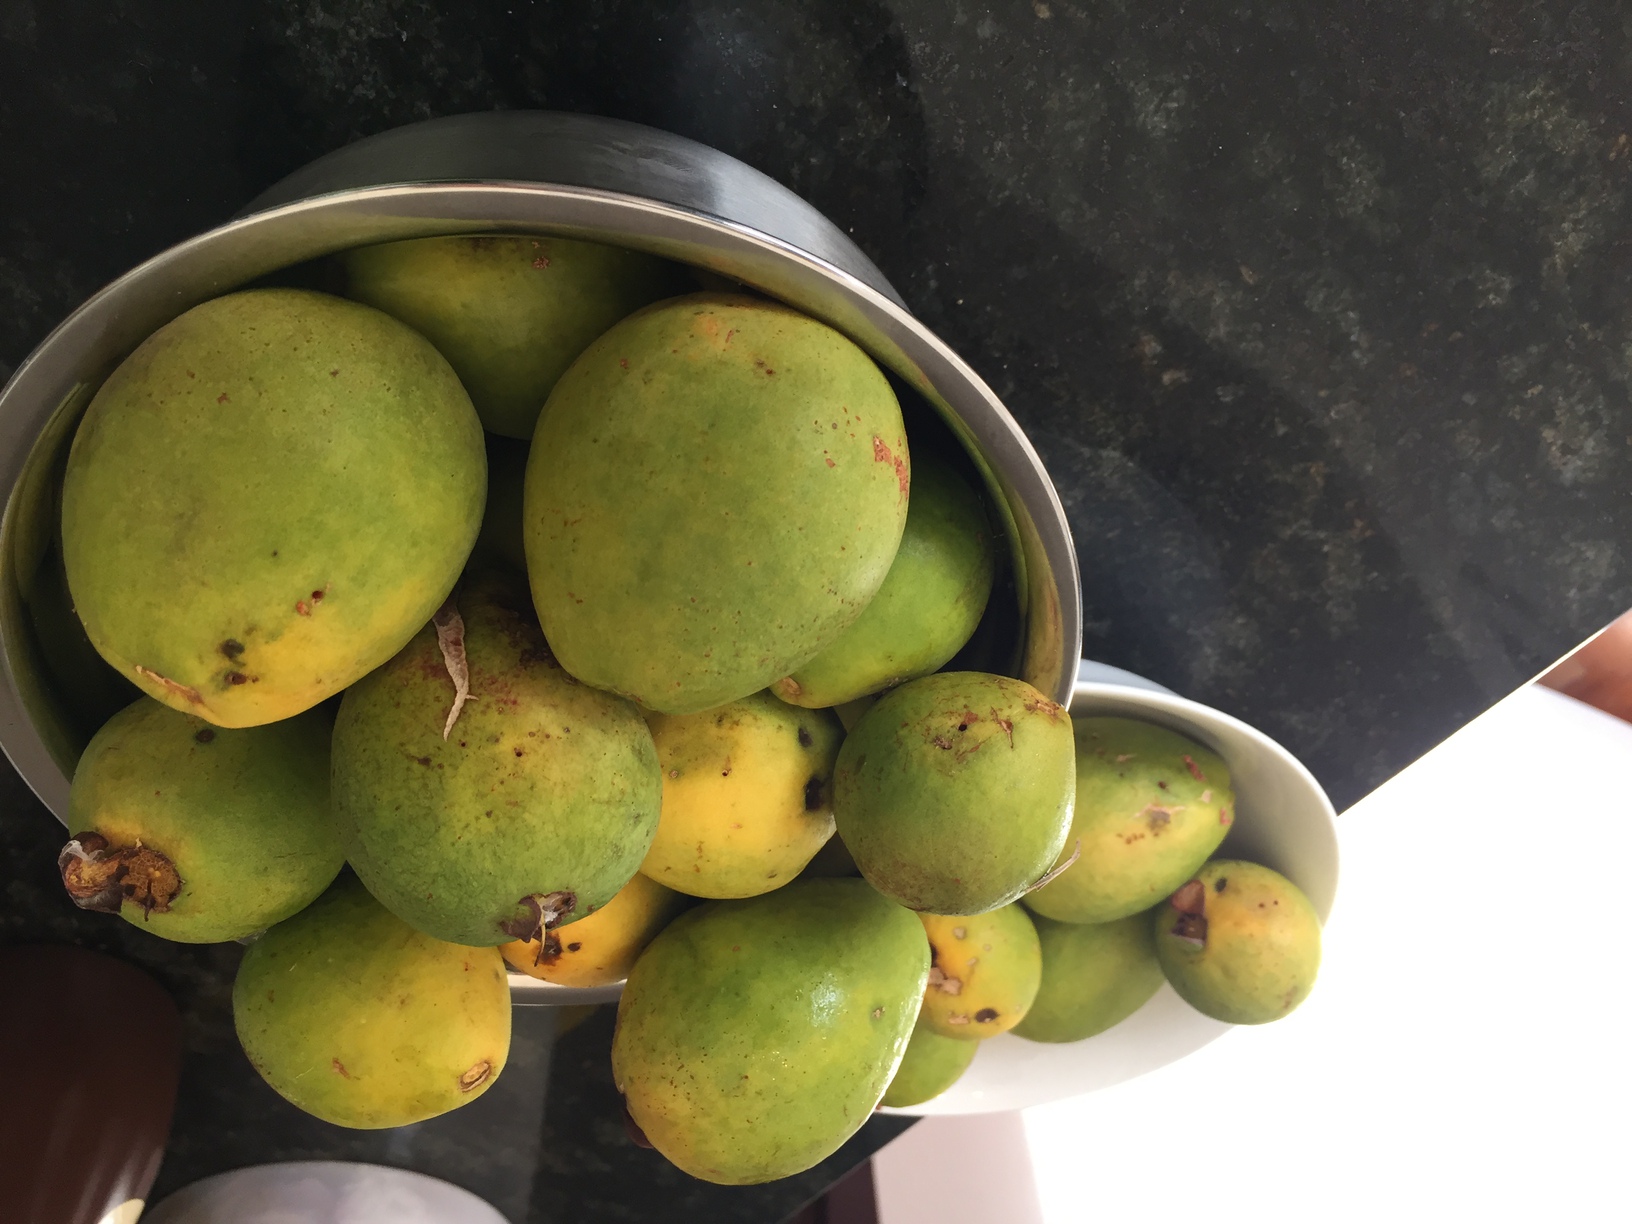 Bowls of guavas. The fruit fly really hammered them, but once you cut out the affected sections, the rest is perfectly usable to make guava pureee.